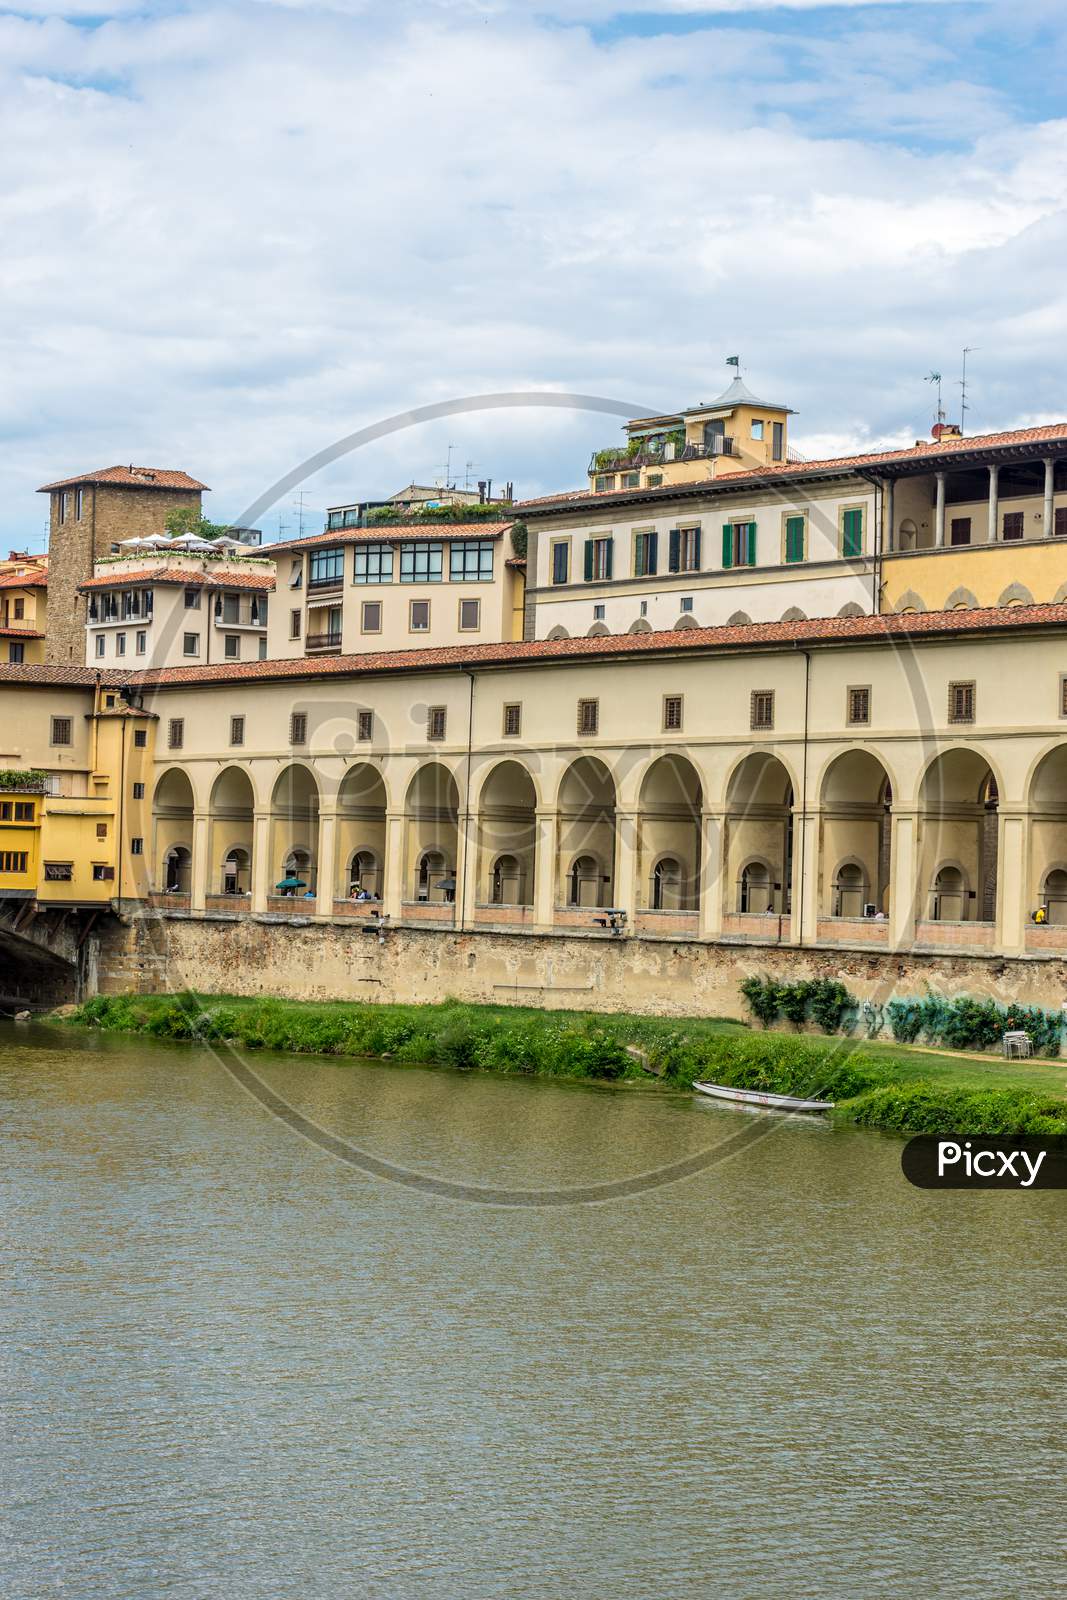 Gallery Of The Uffizi Over The Arno River In Florence, Italy